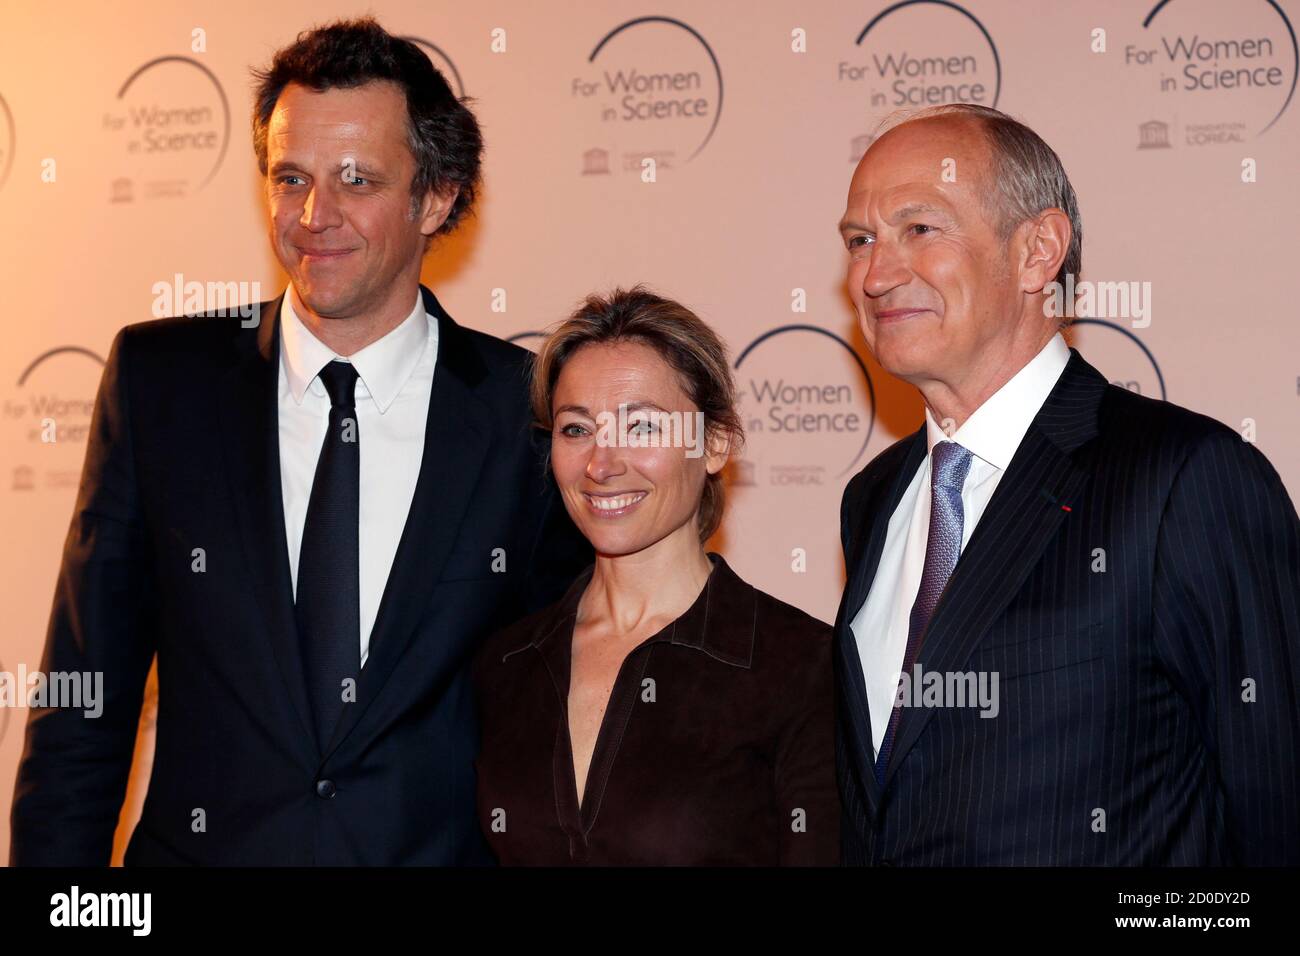 Jean-Paul Agon (R), Chairman and Chief Executive Officer of cosmetics  company L'Oreal, pose with Arthur Sadoun (L), CEO of Publicis France, and  his wife journalist Anne Sophie Lapix as they arrive to